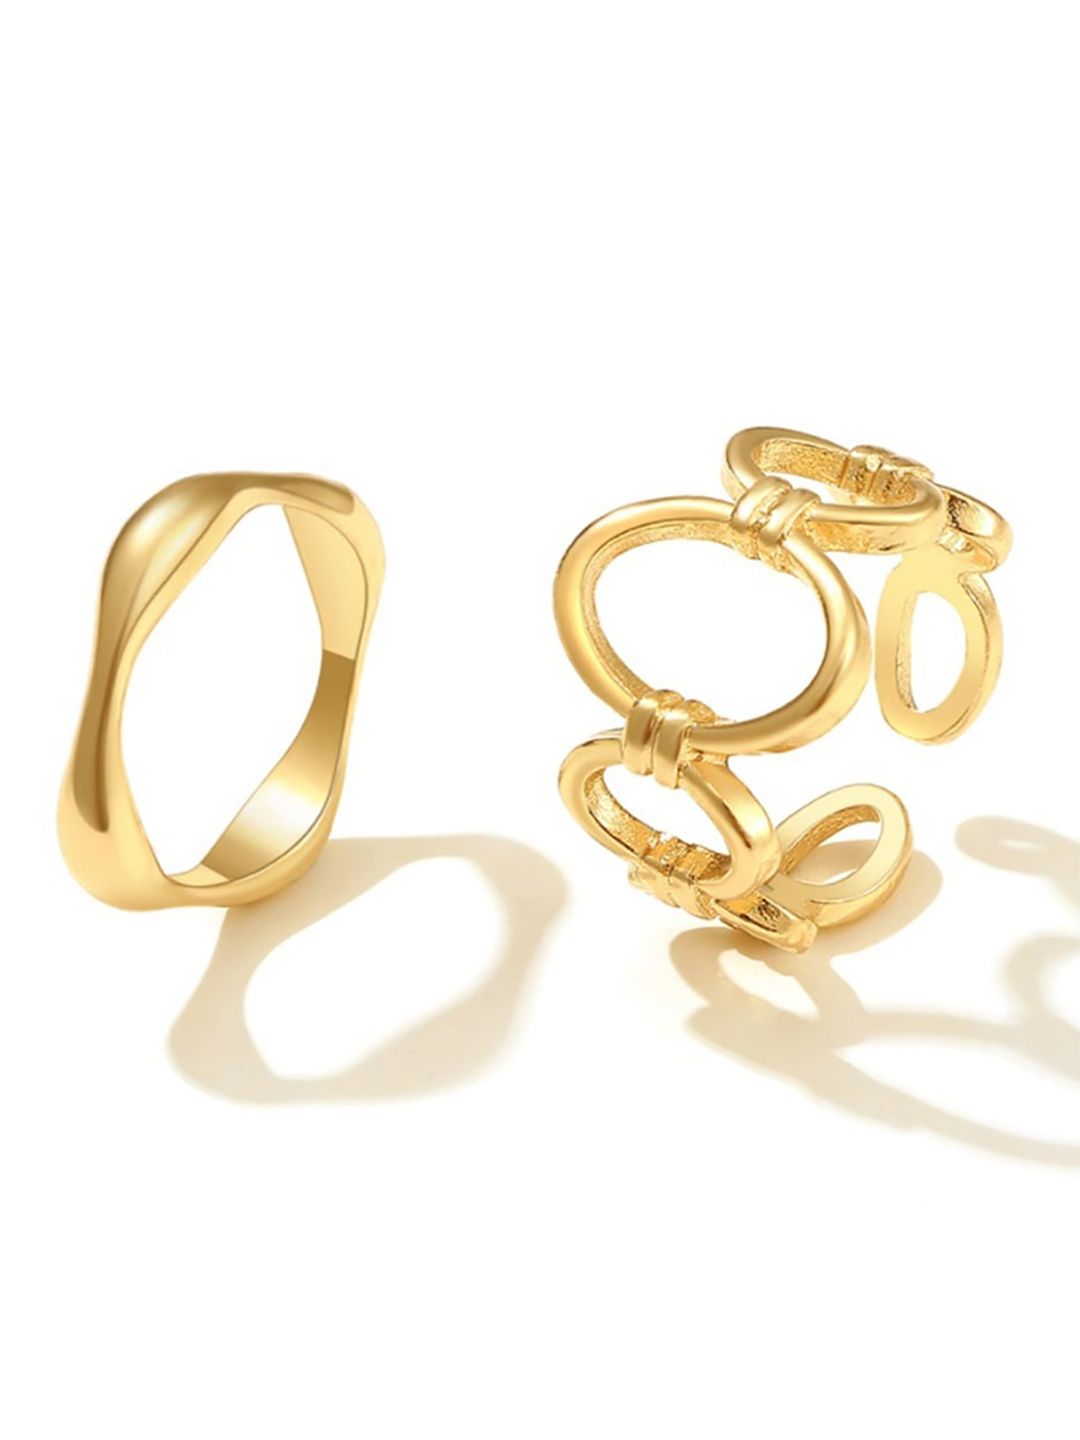 WHITE LIES Set Of 2 Gold-Plated Finger Rings Price in India